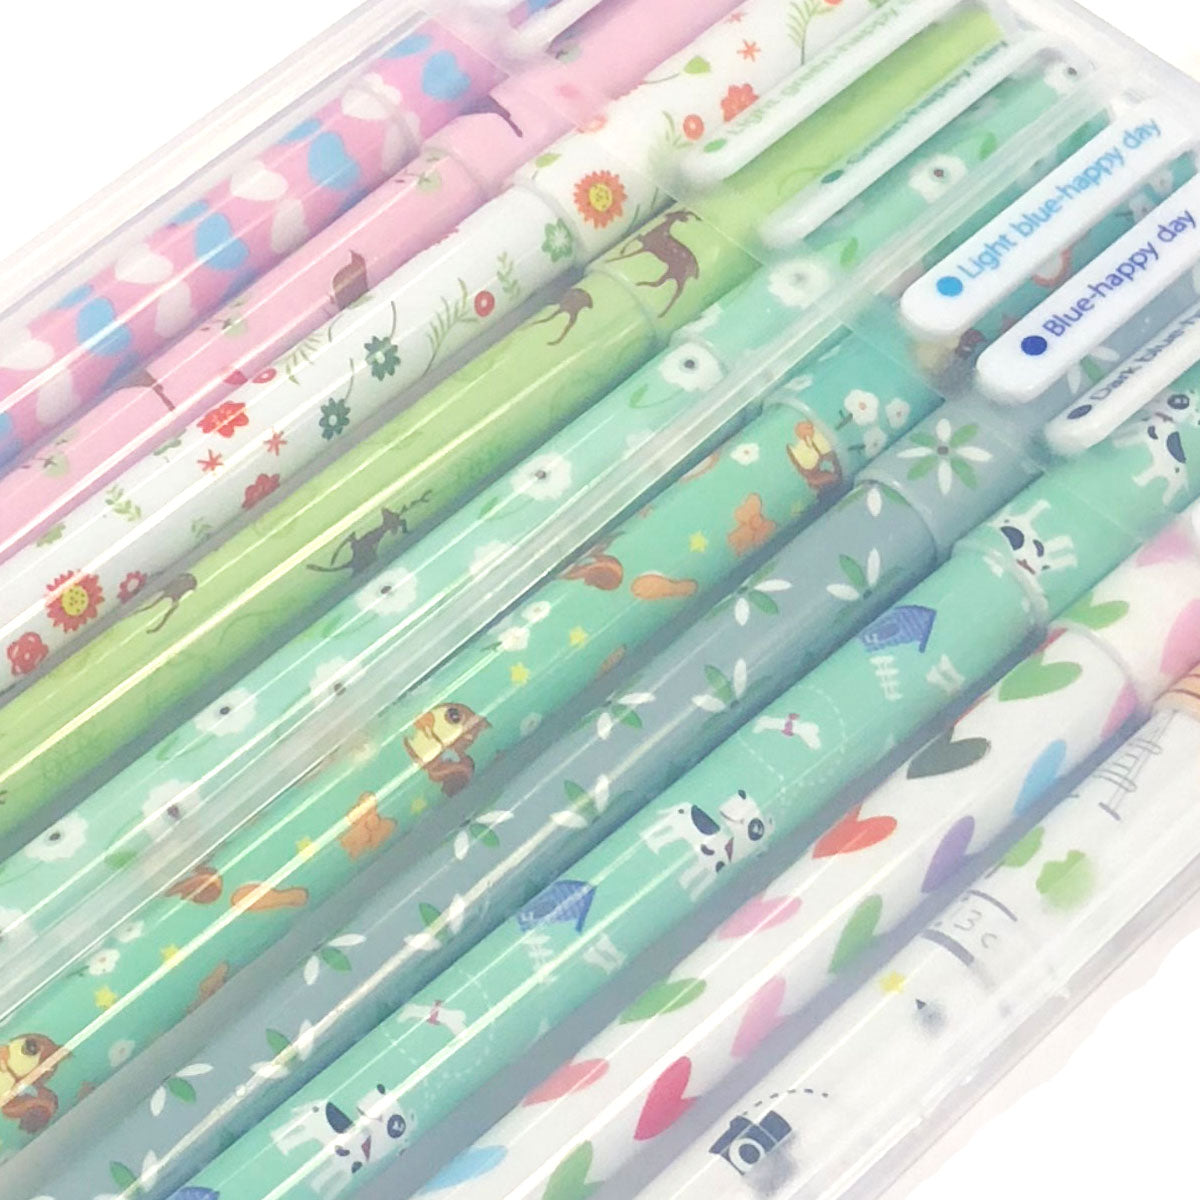 Wrapables Gel Pens (12 pack), Funny Characters